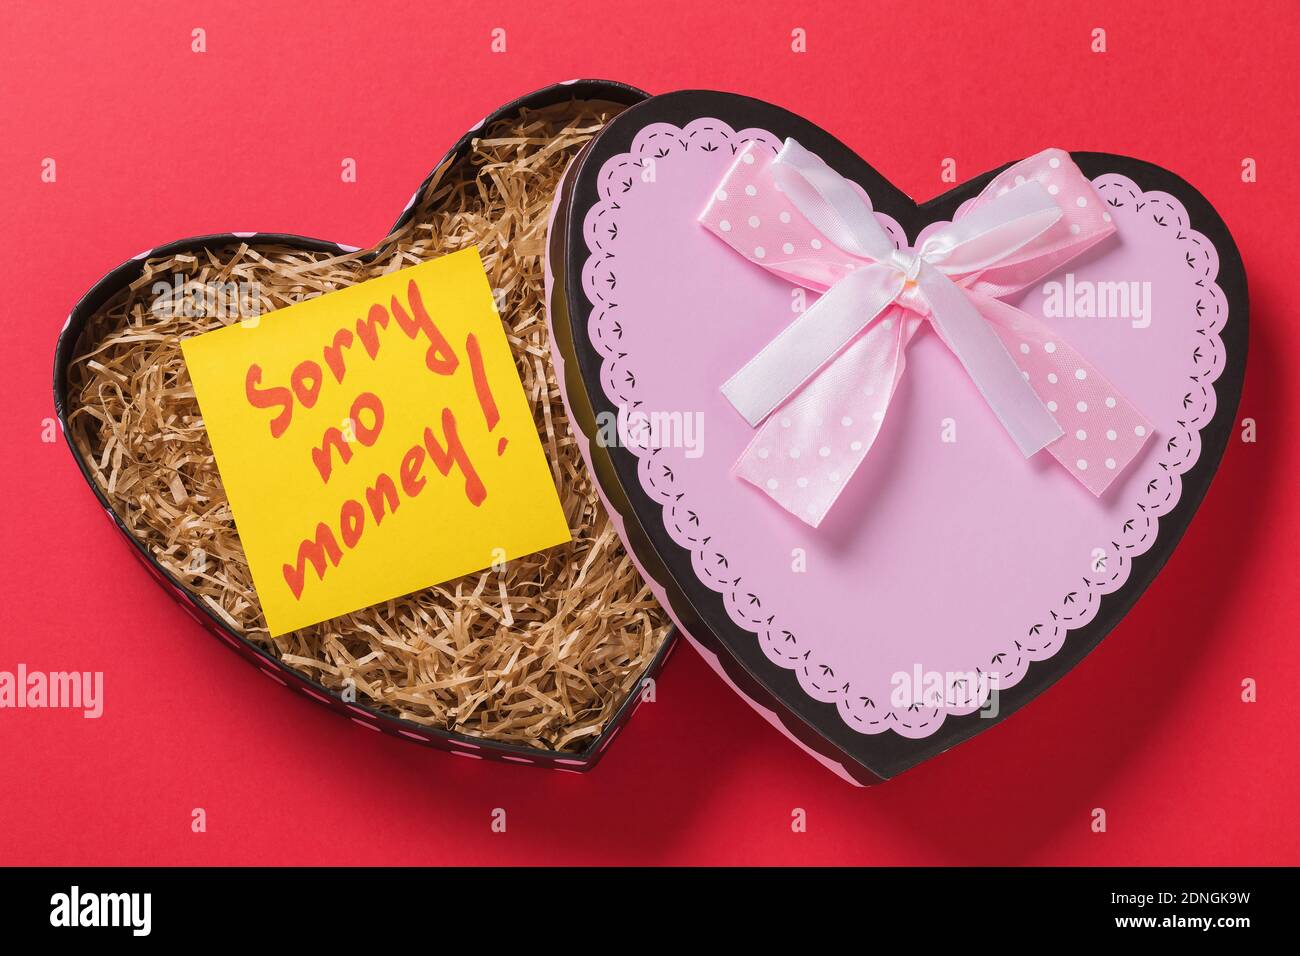 Open gift box with a note inside on a red background. The concept of no money for gifts. Stock Photo